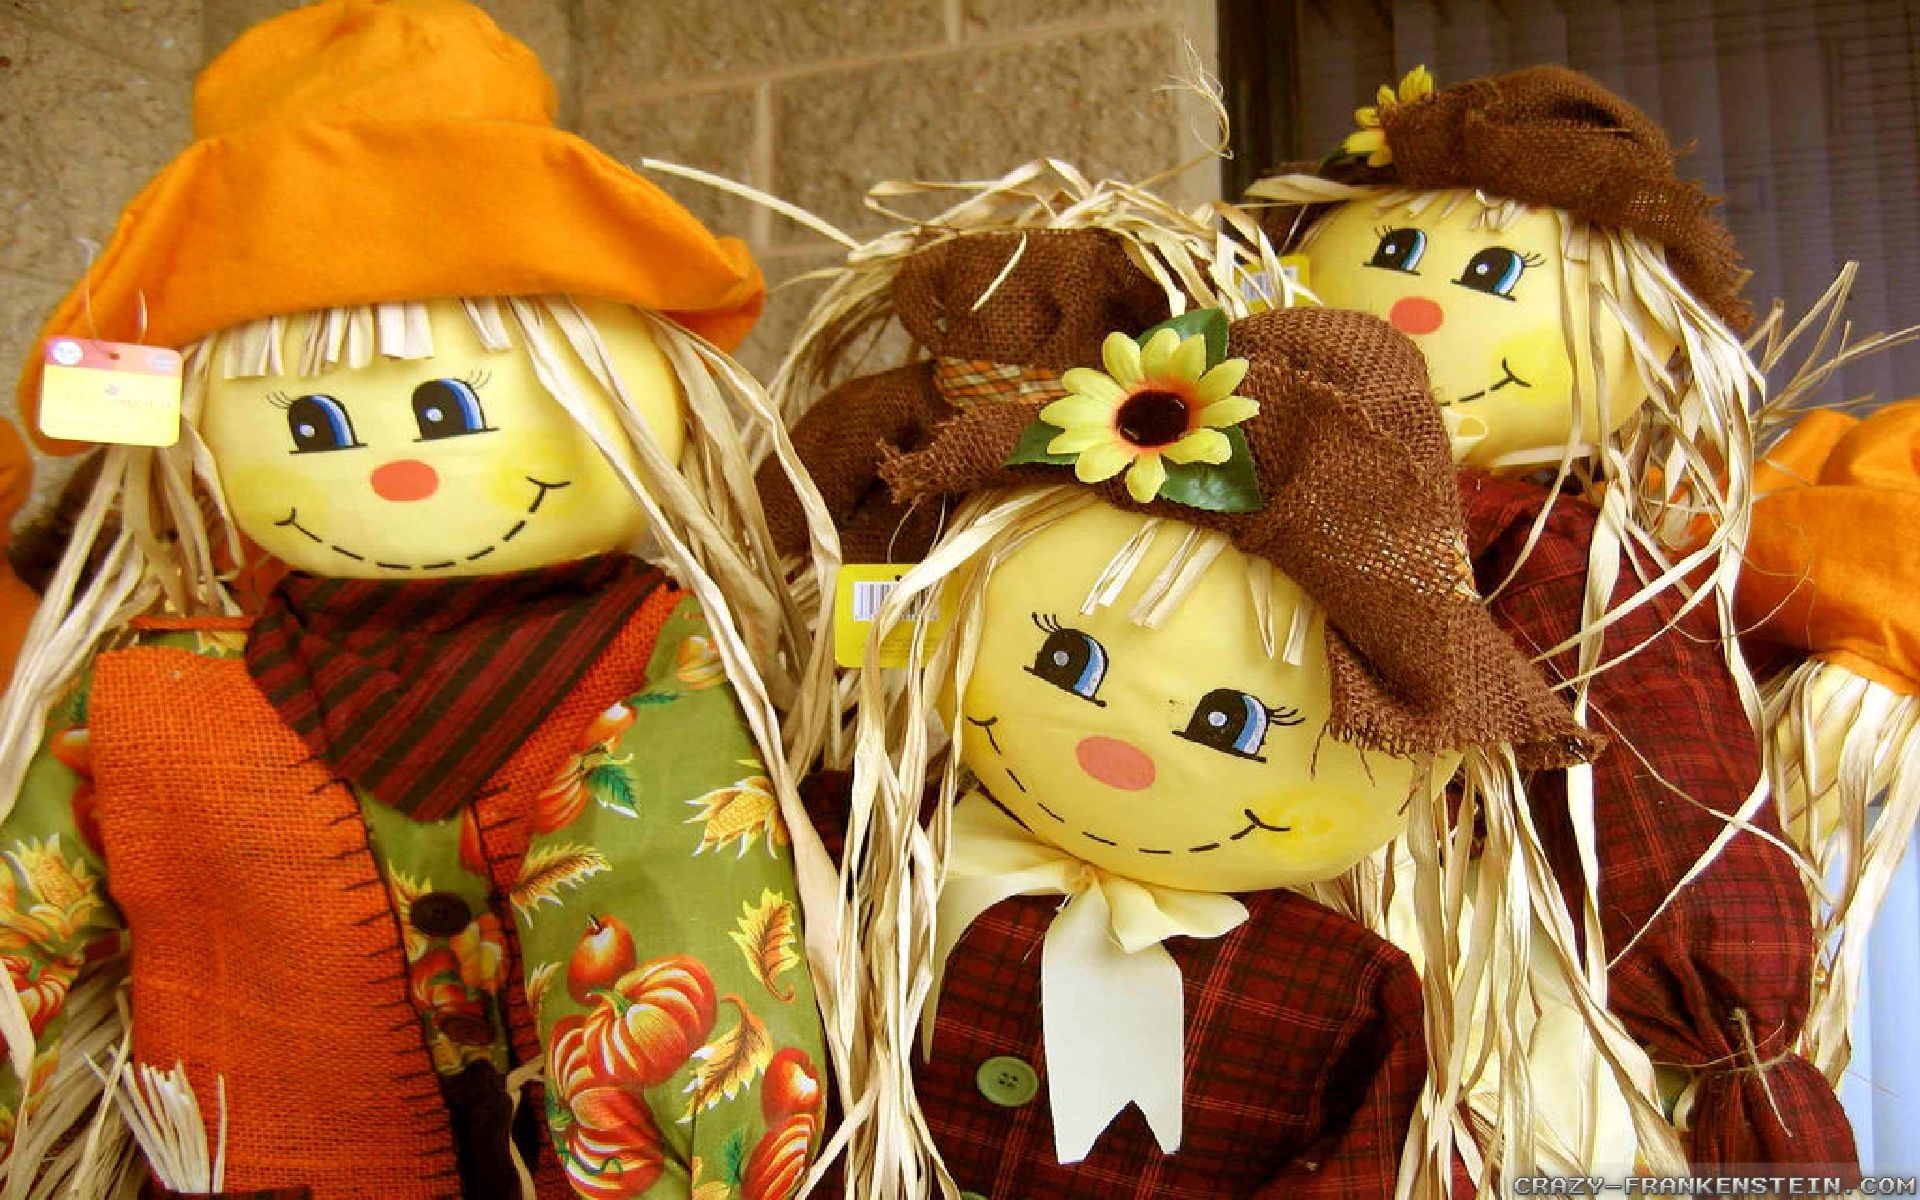 1920x1200 Wallpaper: Scarecrows for autumn decorations wallpapers. Resolution:  1024x768 | 1280x1024 | 1600x1200. Widescreen Res: 1440x900 | 1680x1050 |  